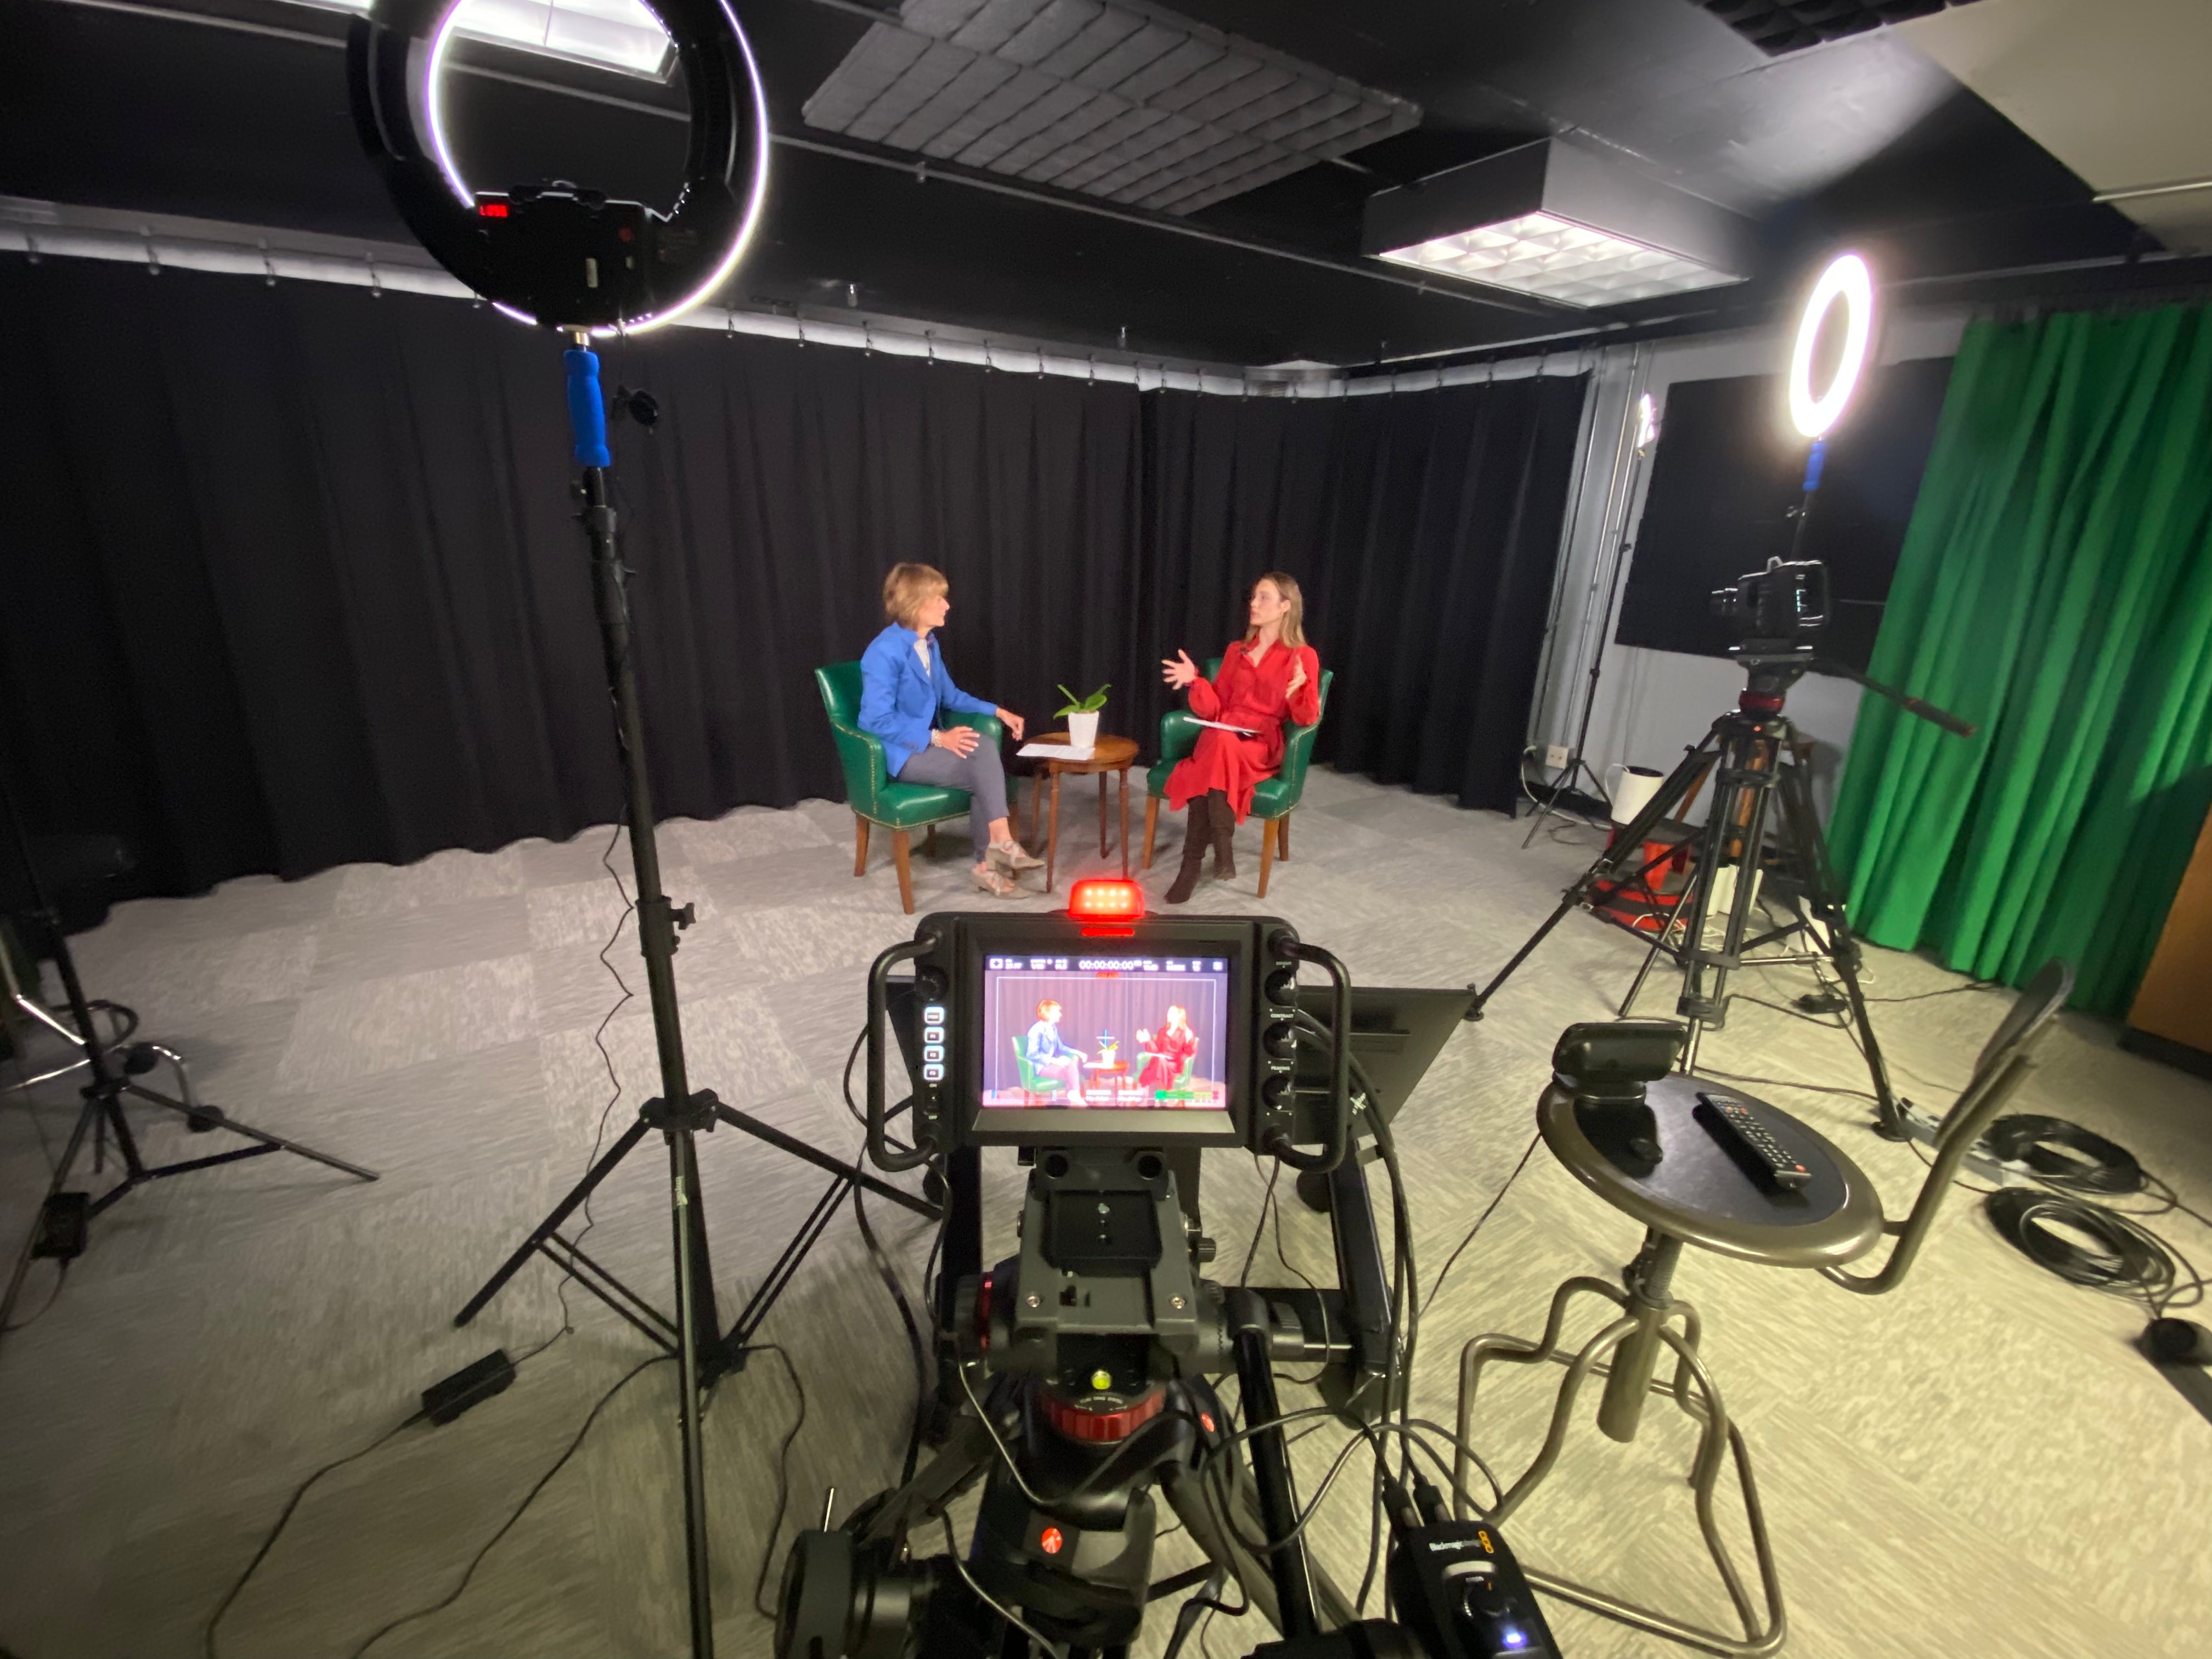 Linda Hall Library Manager of Strategic Partnerships, Kaylee Peile, interviewing Women in STEM advocate Libby Allman for a YouTube series.